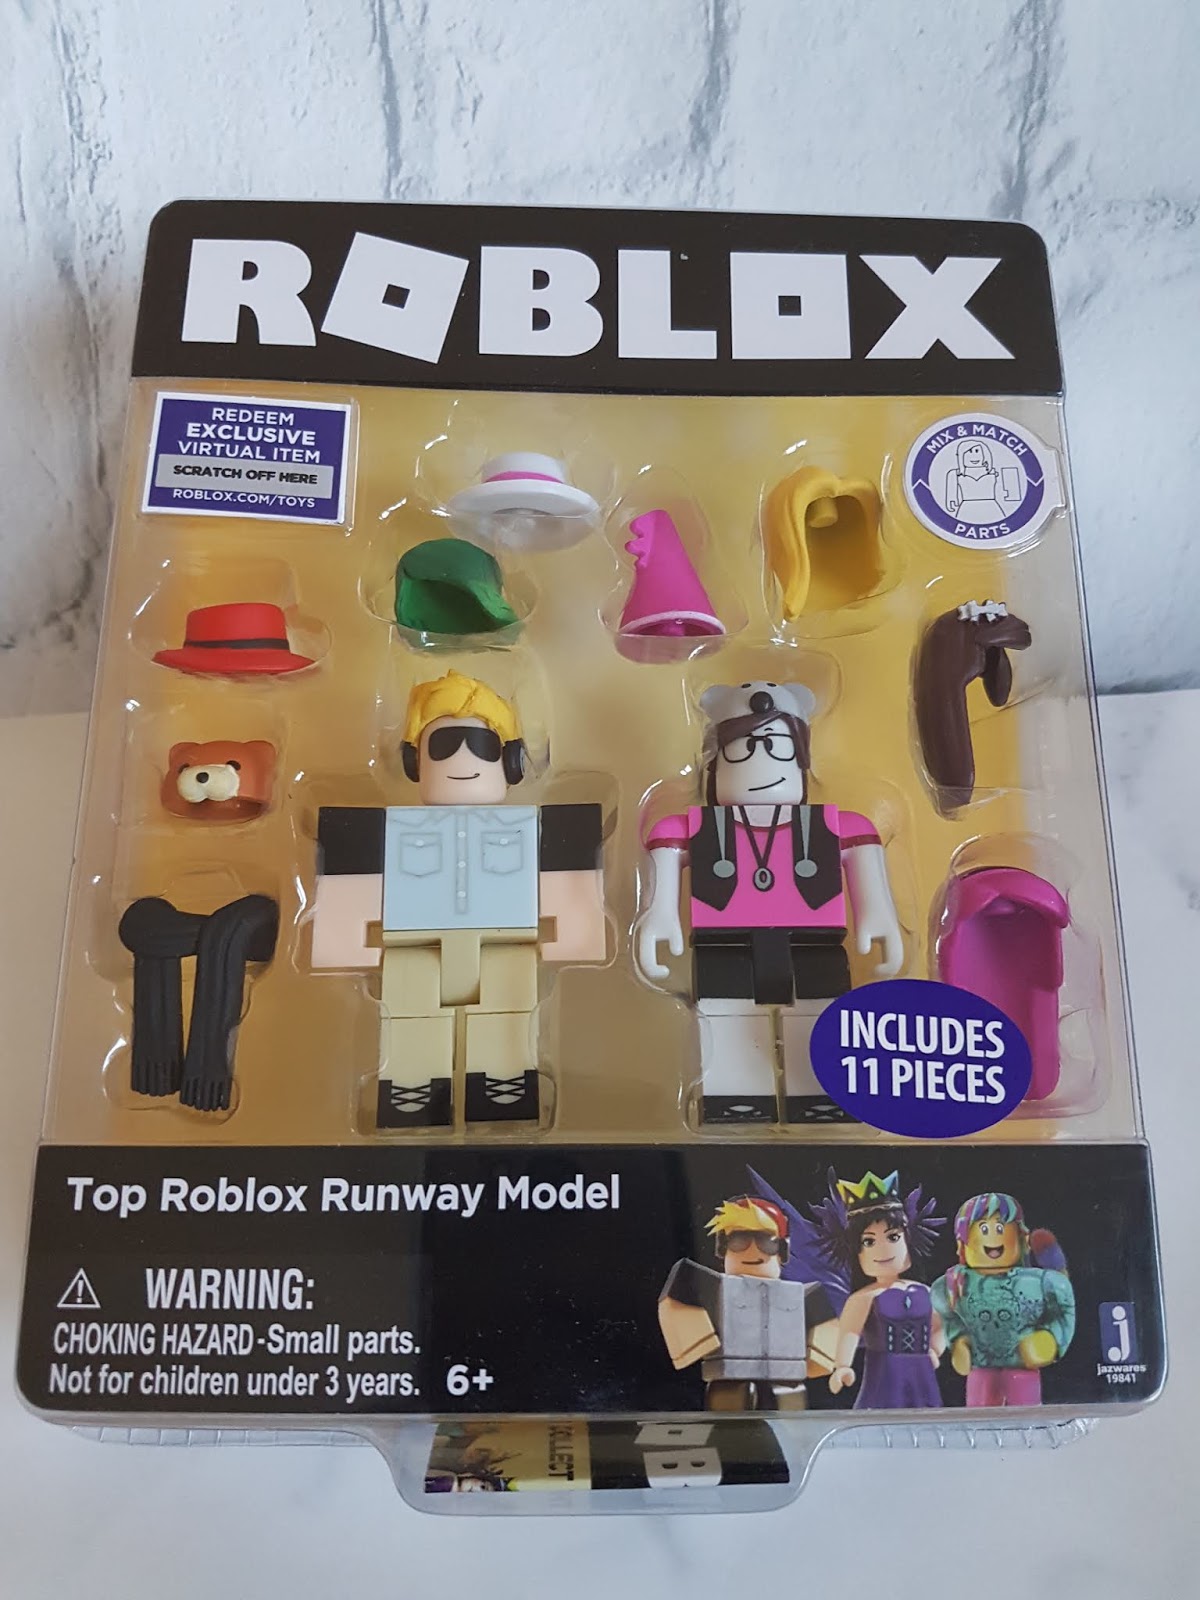 Mummy Of 3 Diaries Roblox Celebrity Series 1 Review - virtual item code 25 roblox series 1 celebrity collection